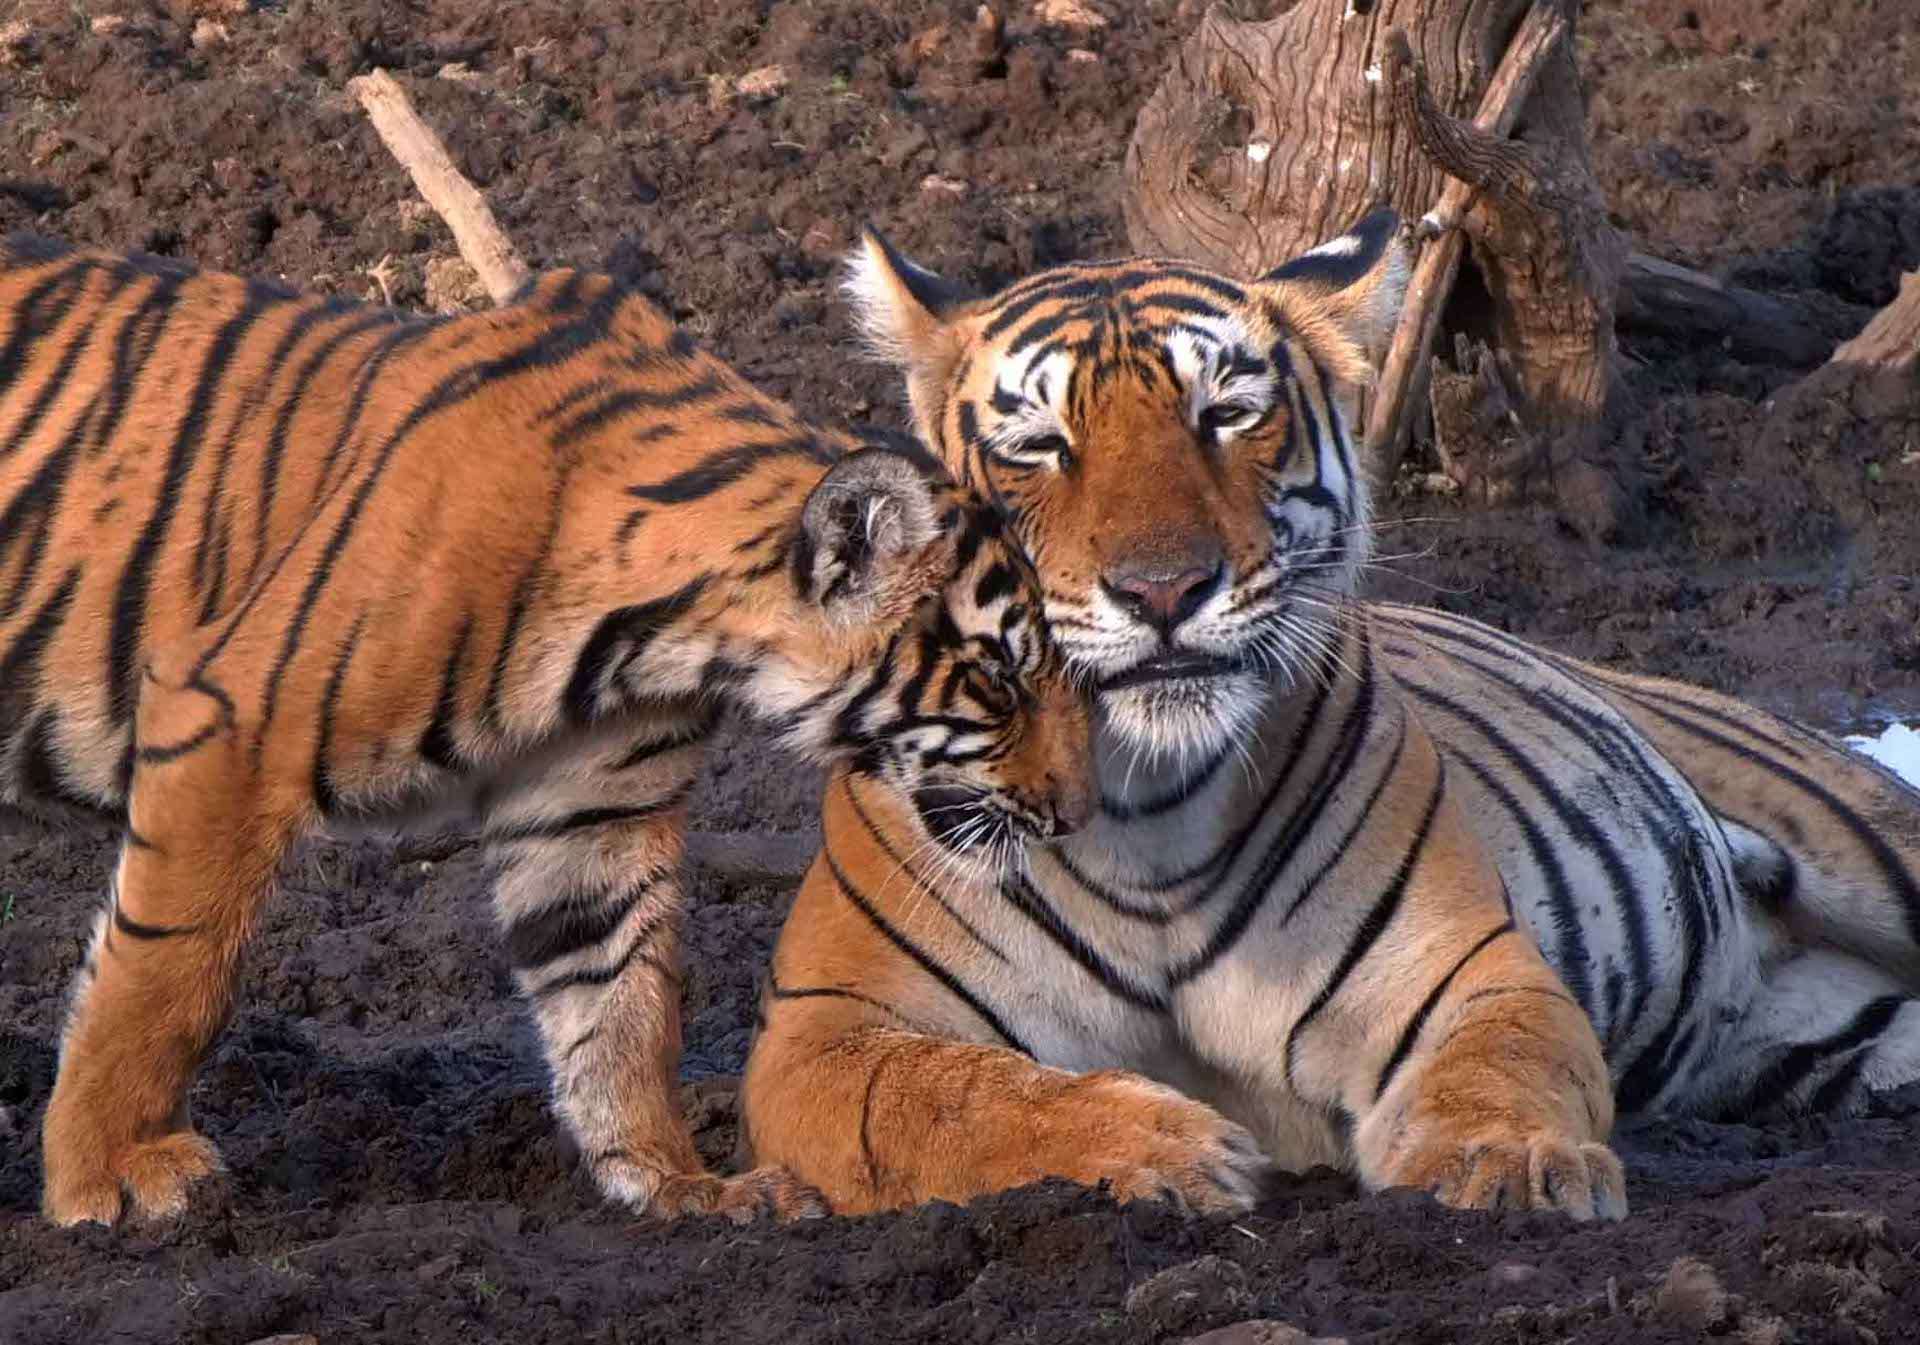 A tiger mother and cub bond in Ranthambore National Park, India